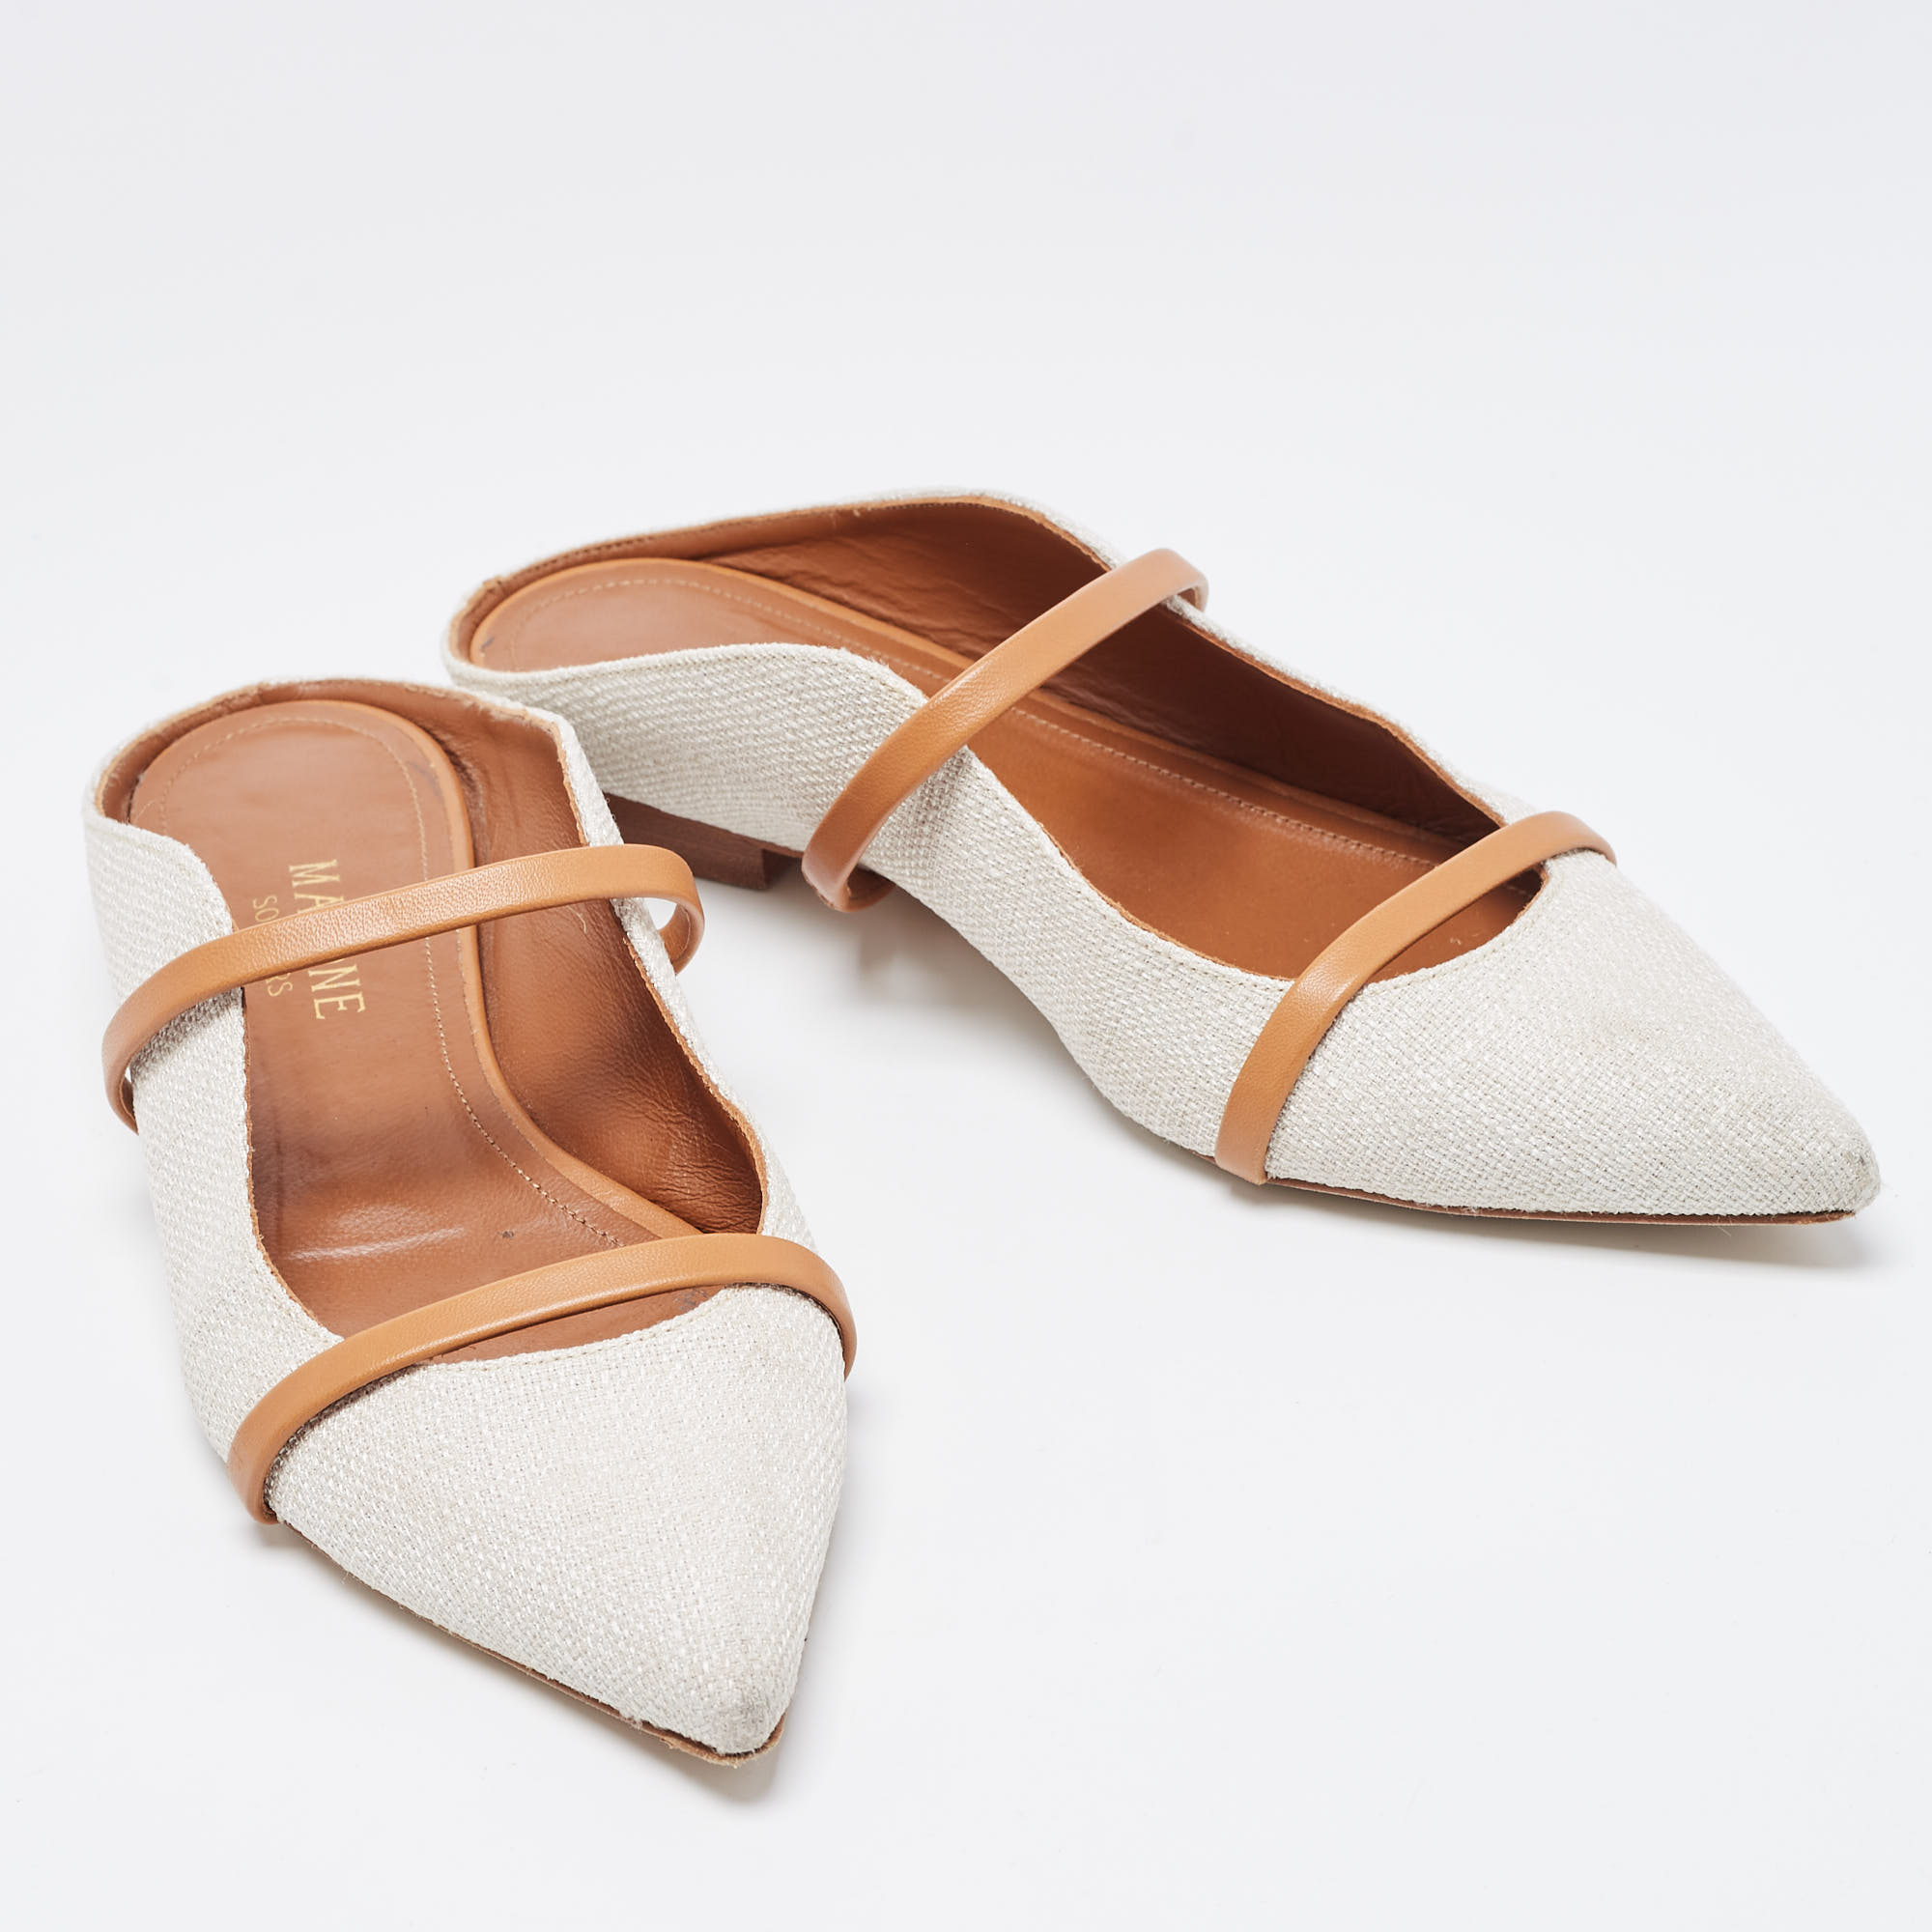 Malone Souliers White/Tan Canvas And Leather Maureen Flat Mules Size 36